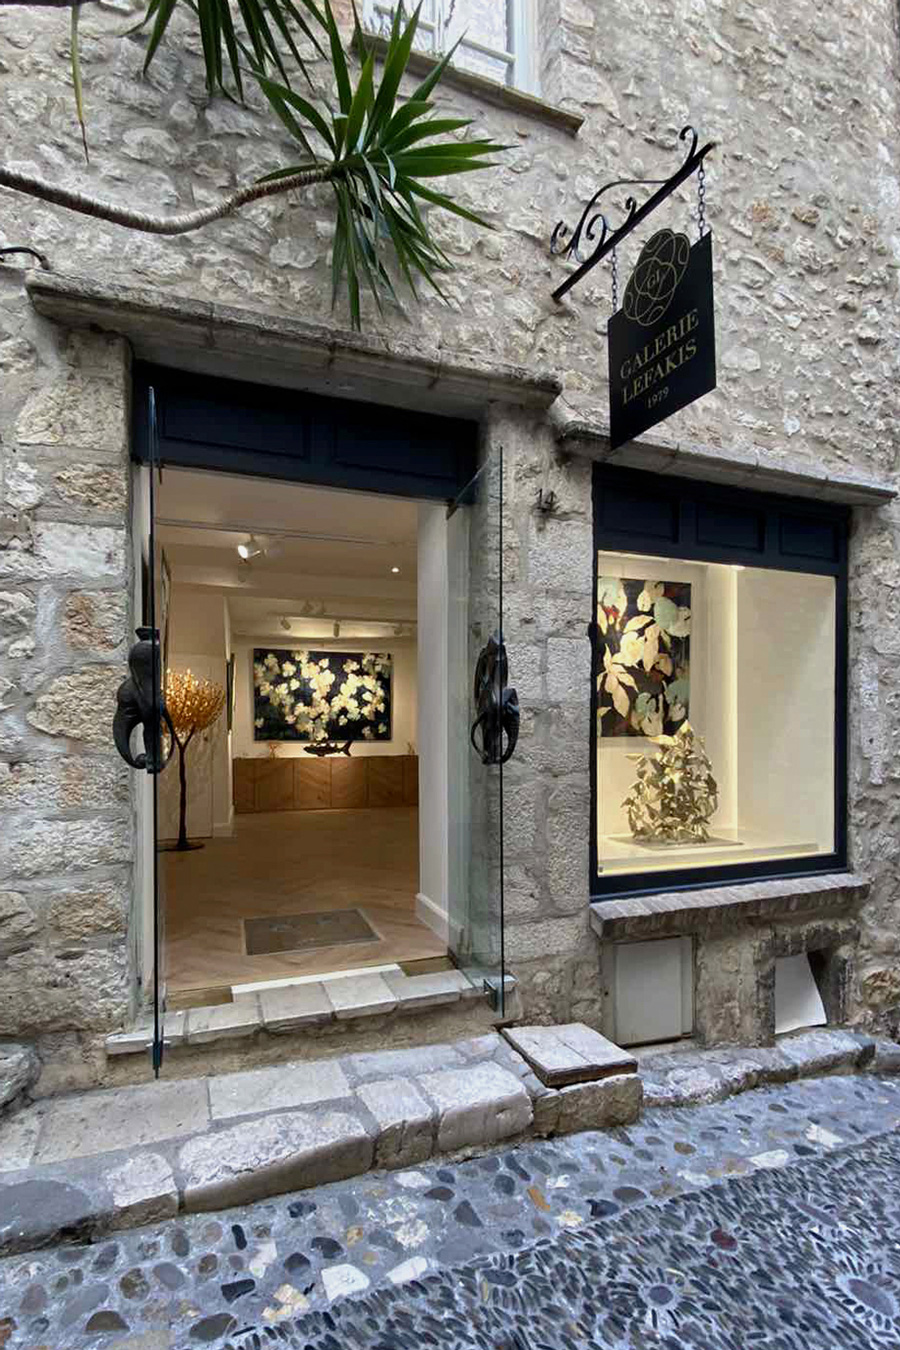 The Galerie Lefakis is hosted in a medieval building in saint Paul de Vence, S. France